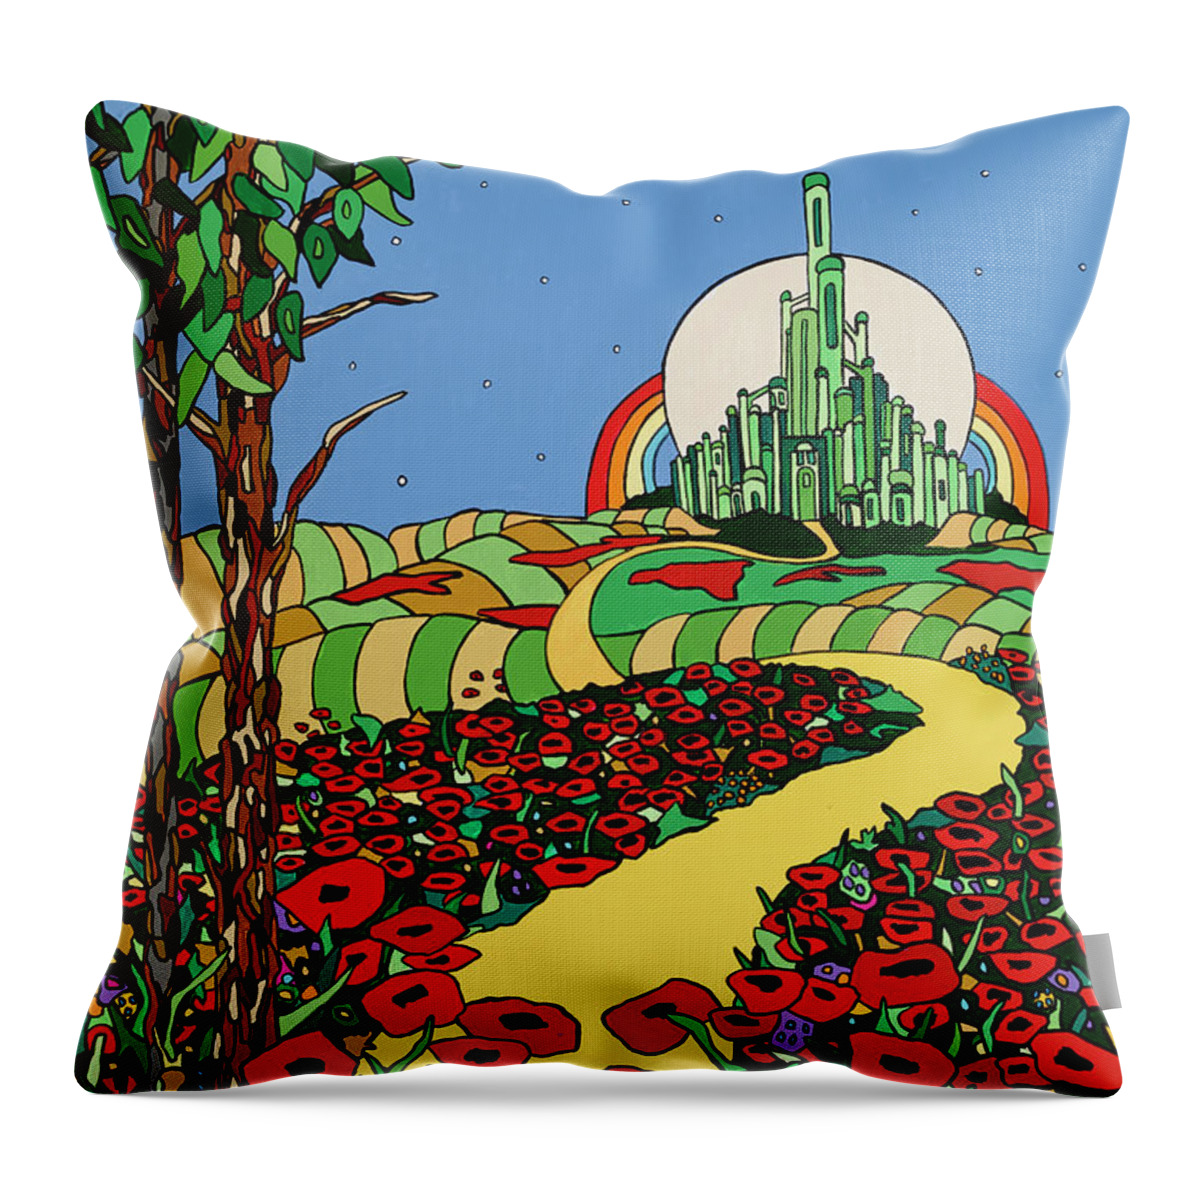 Wizard Of Oz Dorothy Toto Red Slippers Scarecrow Cowardly Lion Tin Man Wicked Witch Throw Pillow featuring the painting Follow the Yellow Brick Road by Mike Stanko